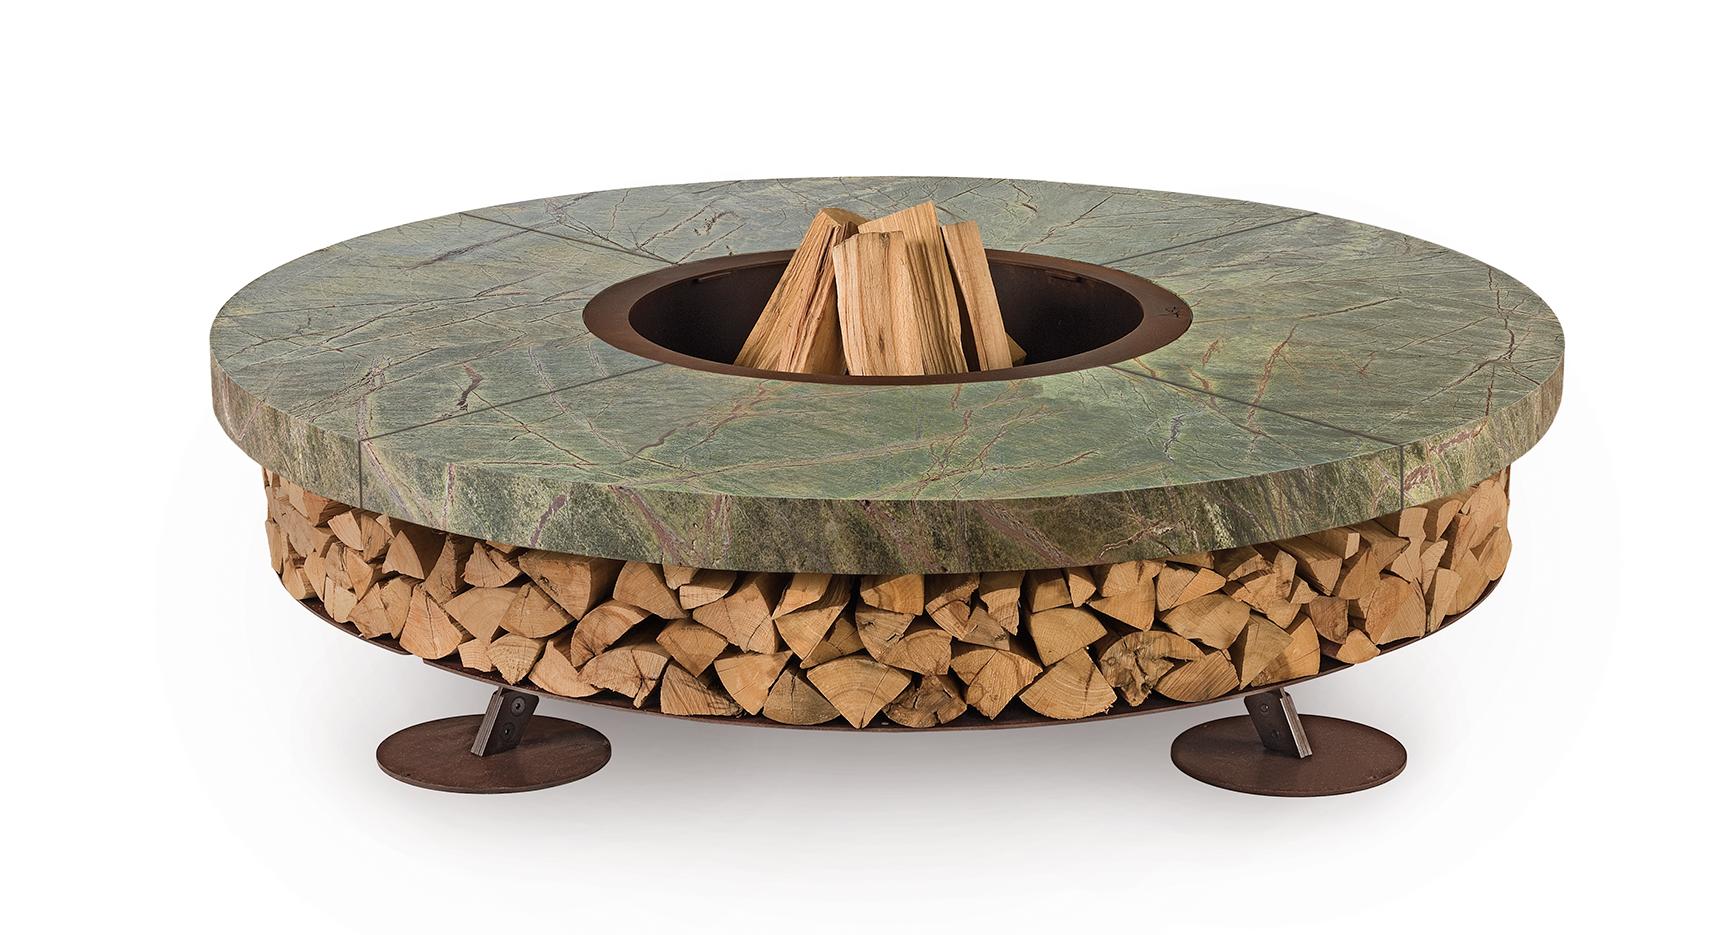 Ercole Marble Outdoor Italian Fire Pit